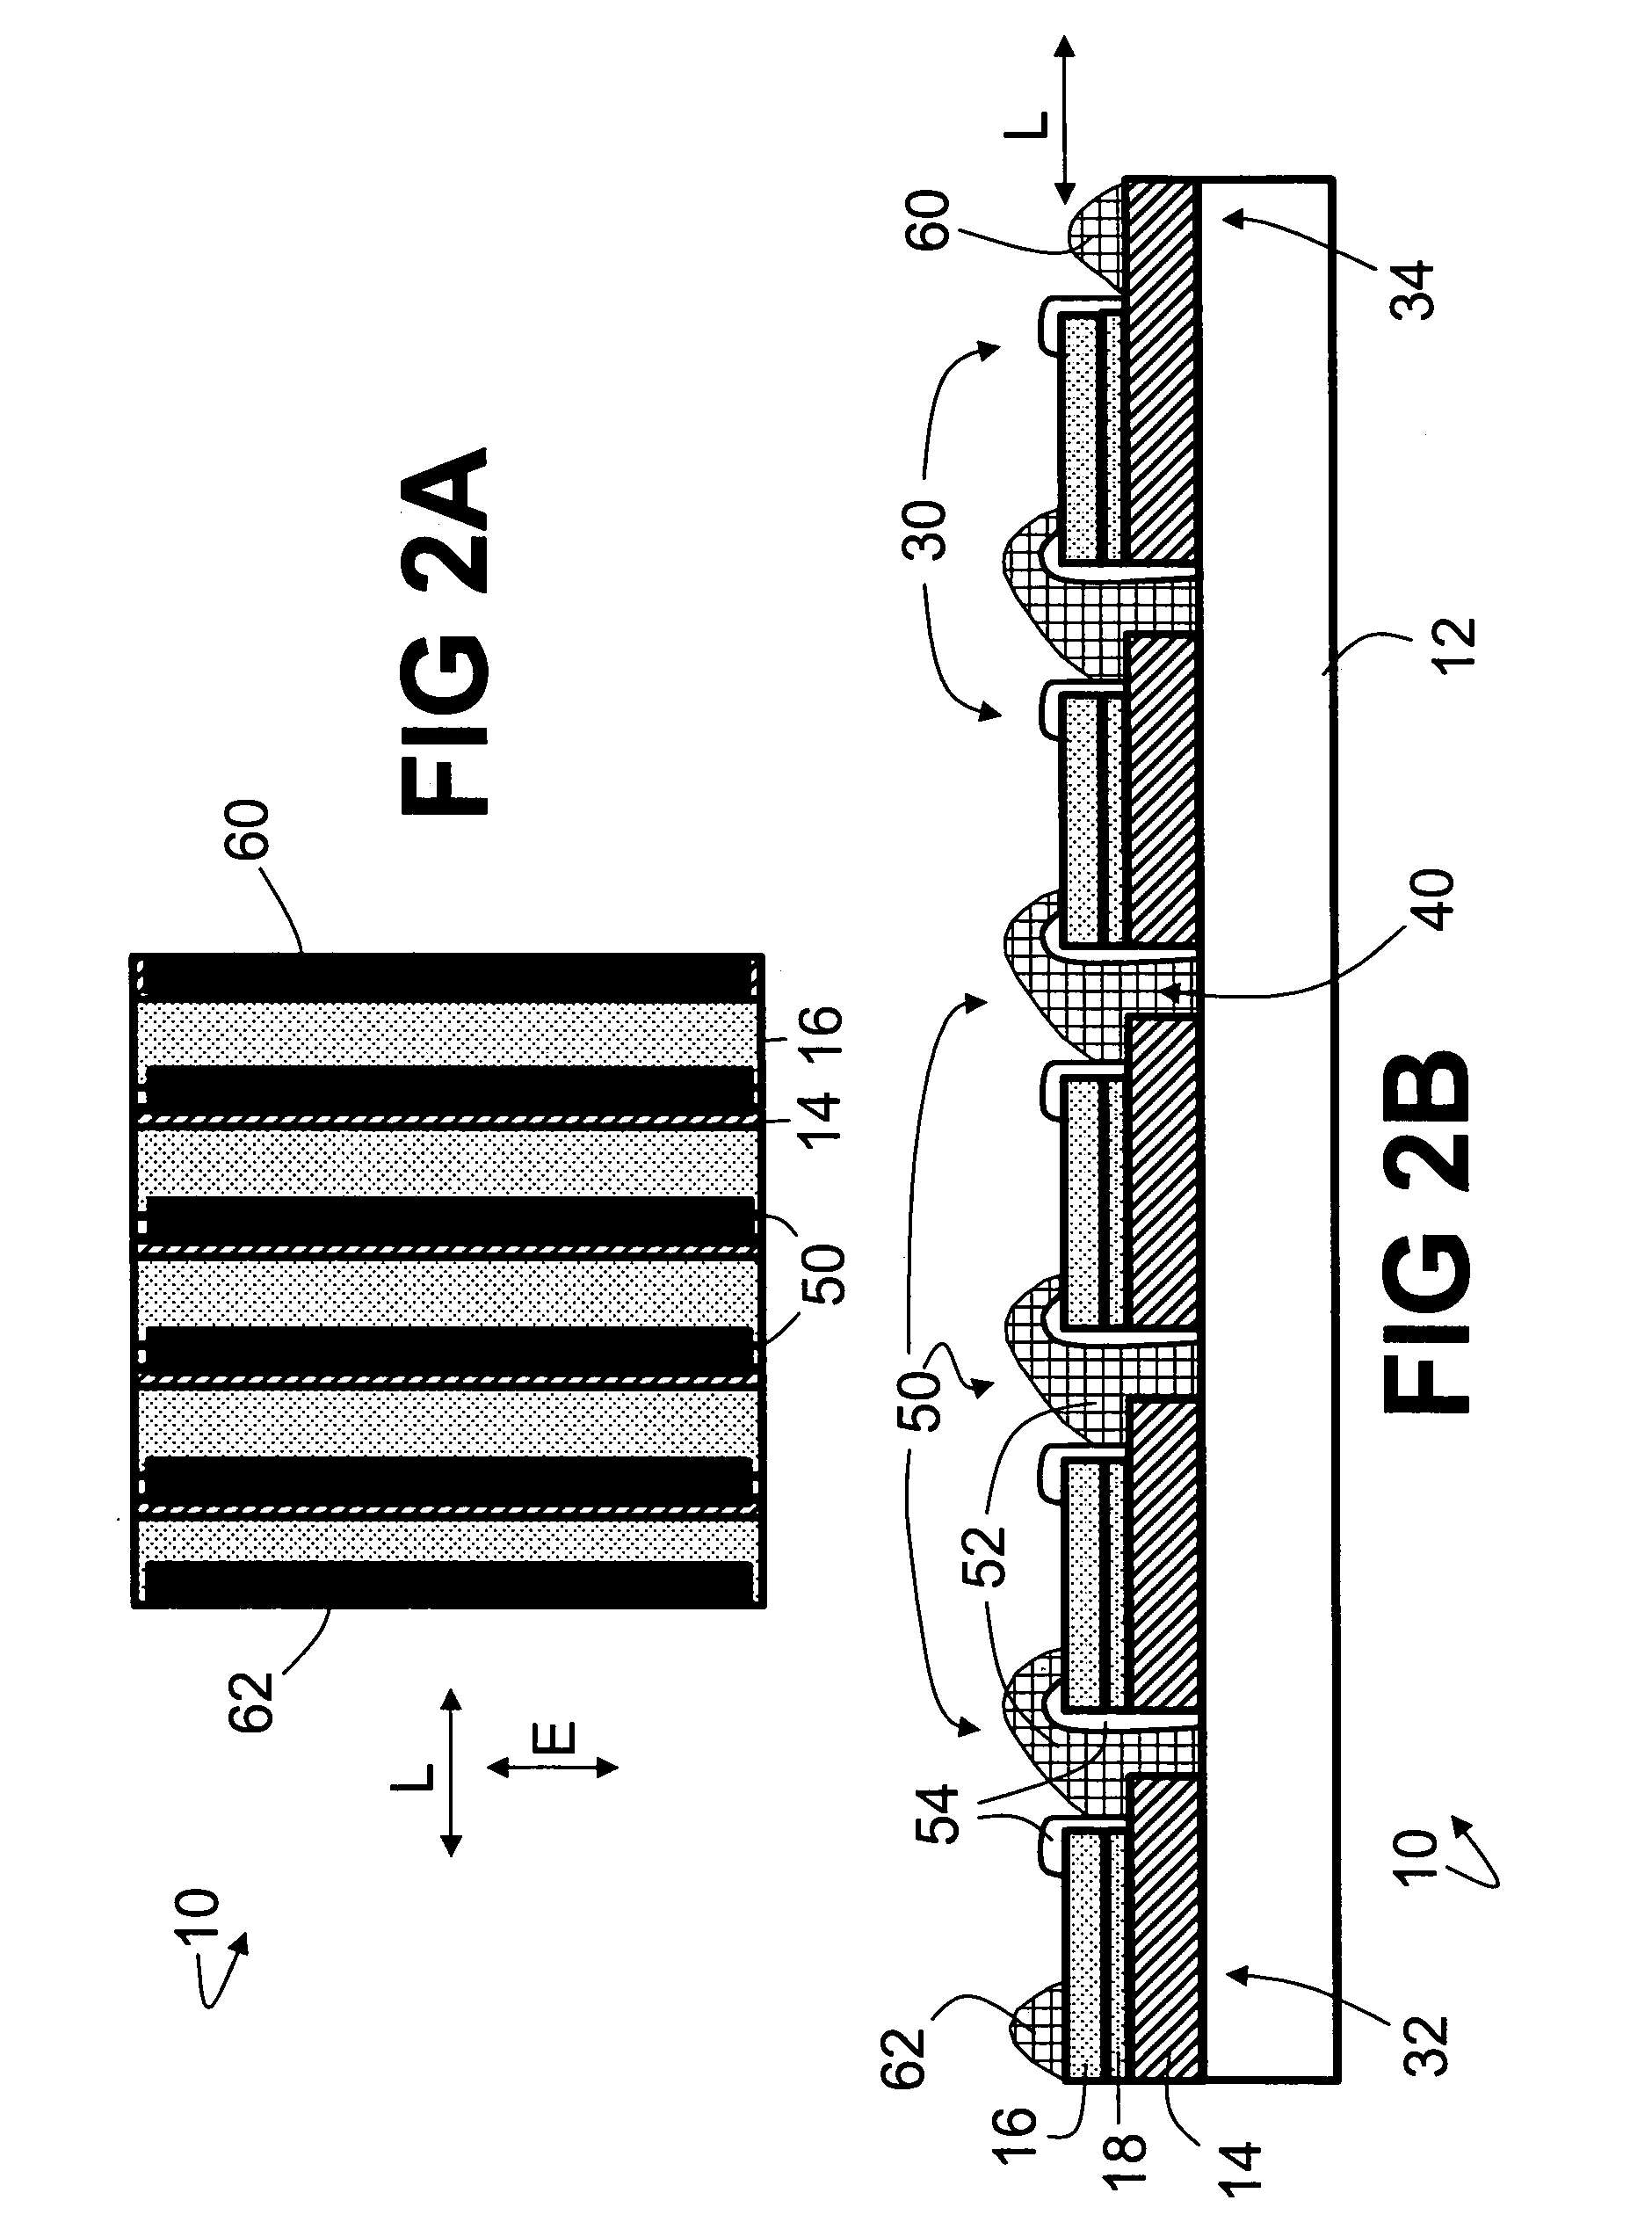 LED with series-connected monolithically integrated mesas